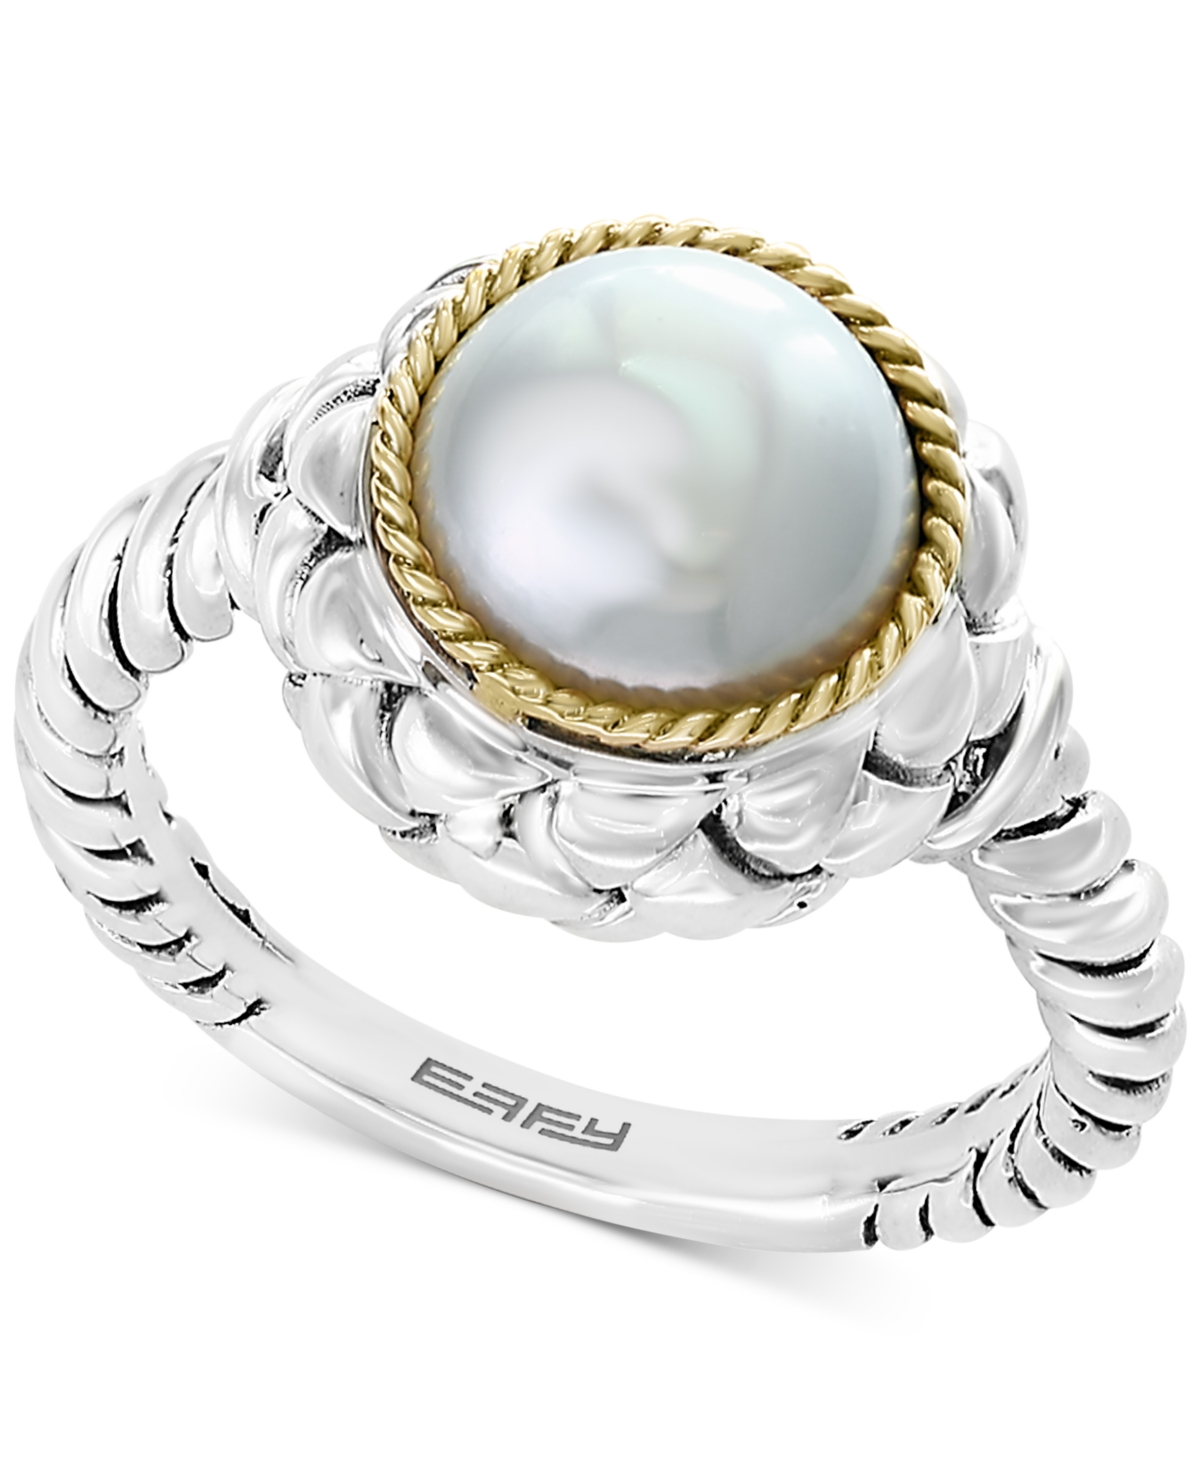 Effy Collection Effy Cultured Freshwater Pearl (9mm) Ring in Sterling Silver & 18k Gold